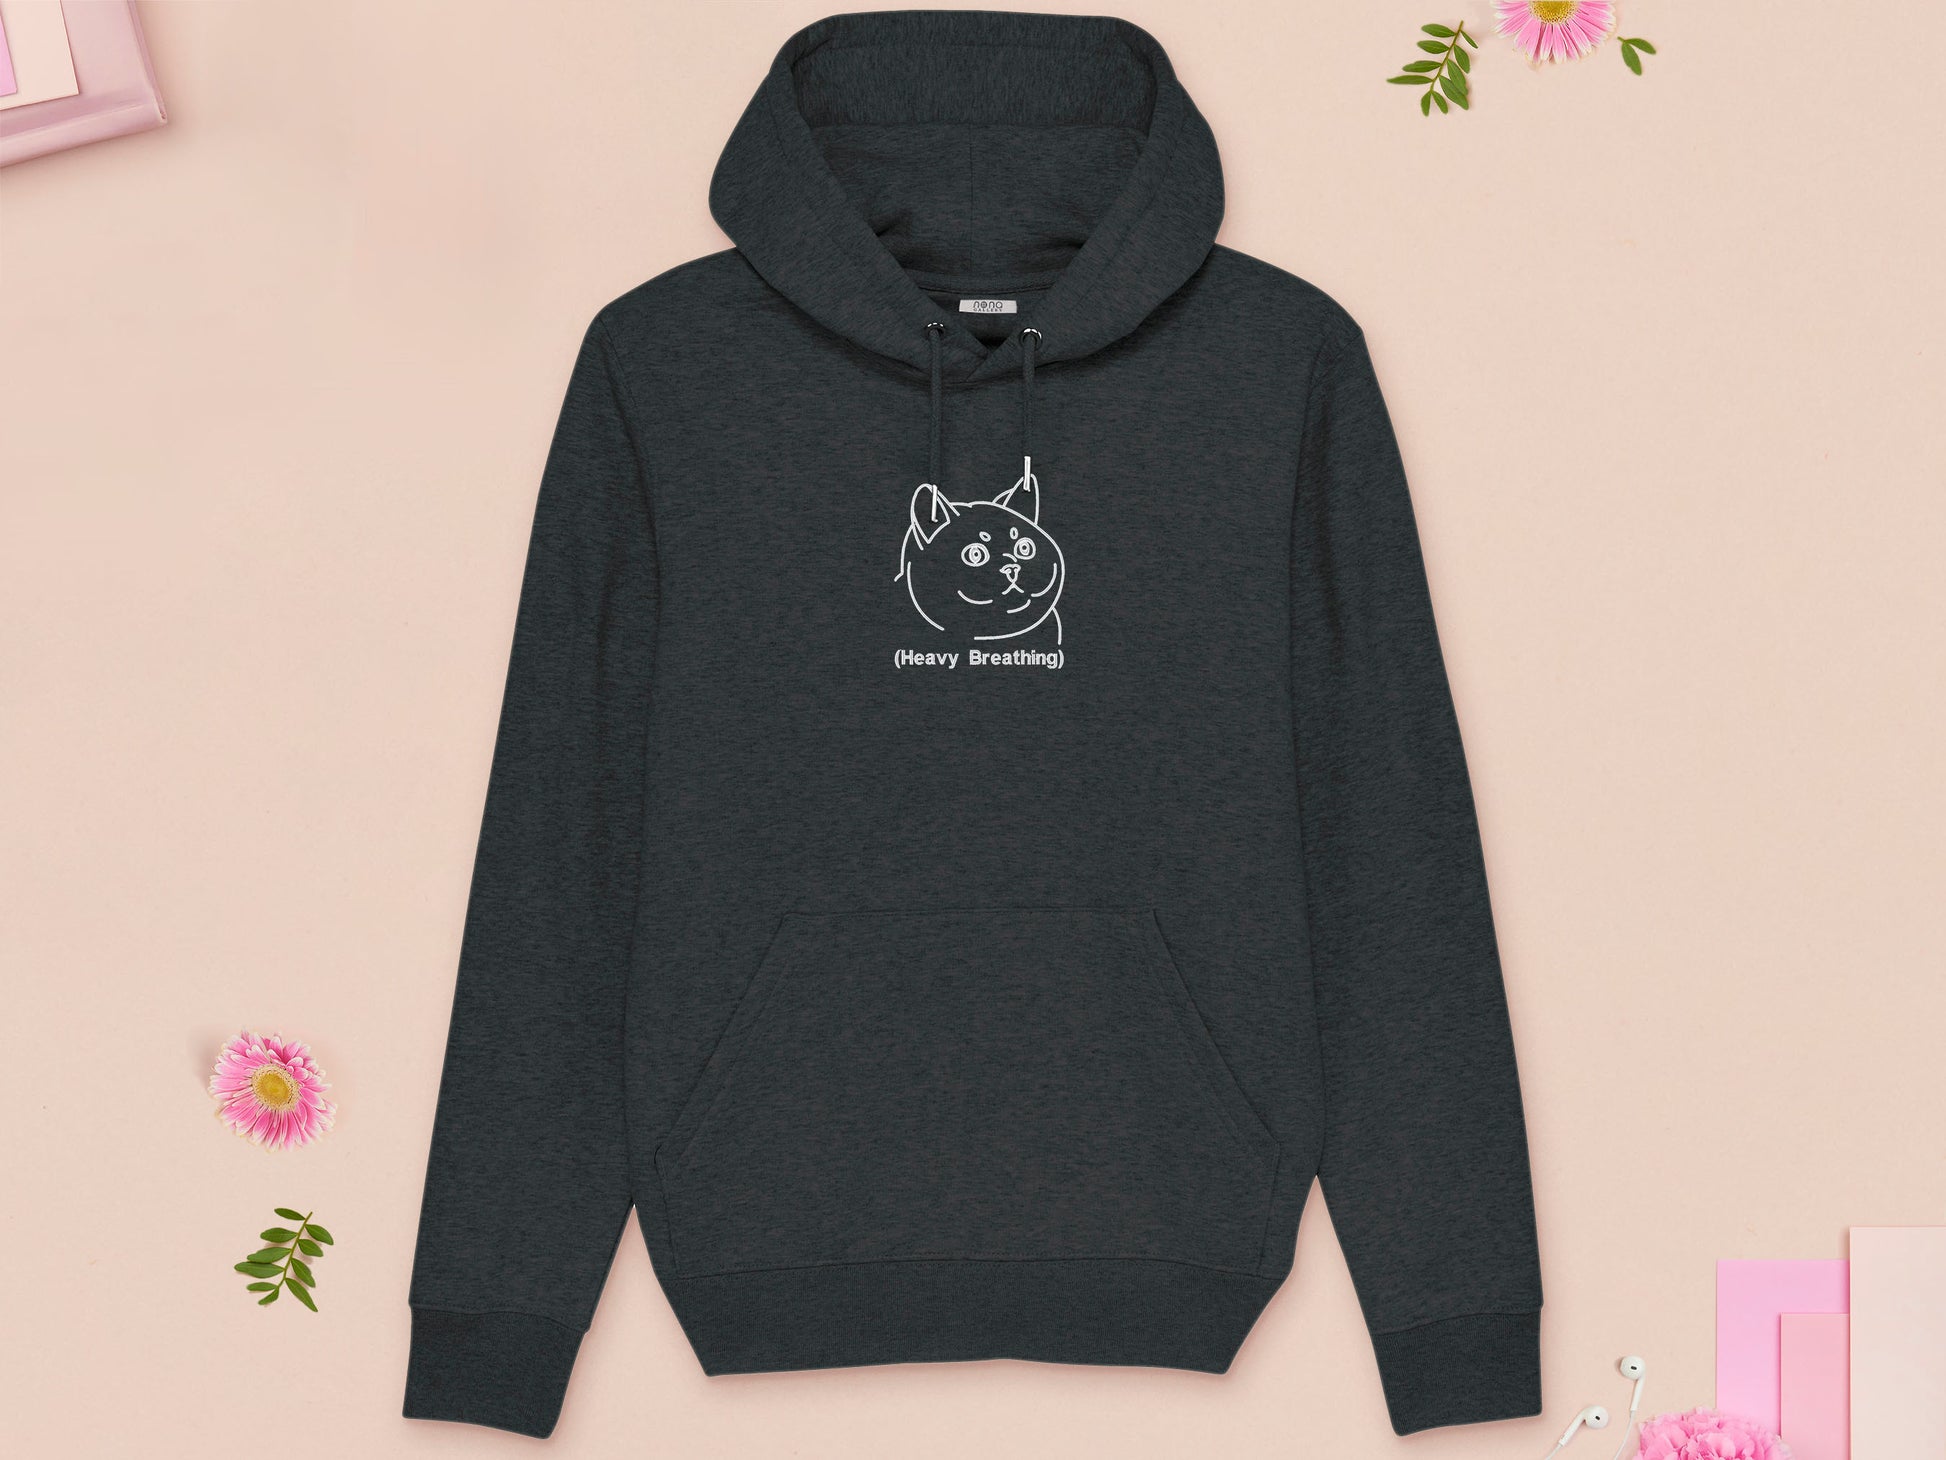 A grey long sleeve fleece hoodie, with an embroidered white thread design of cute fat cat portrait with text underneath saying (Heavy Breathing)